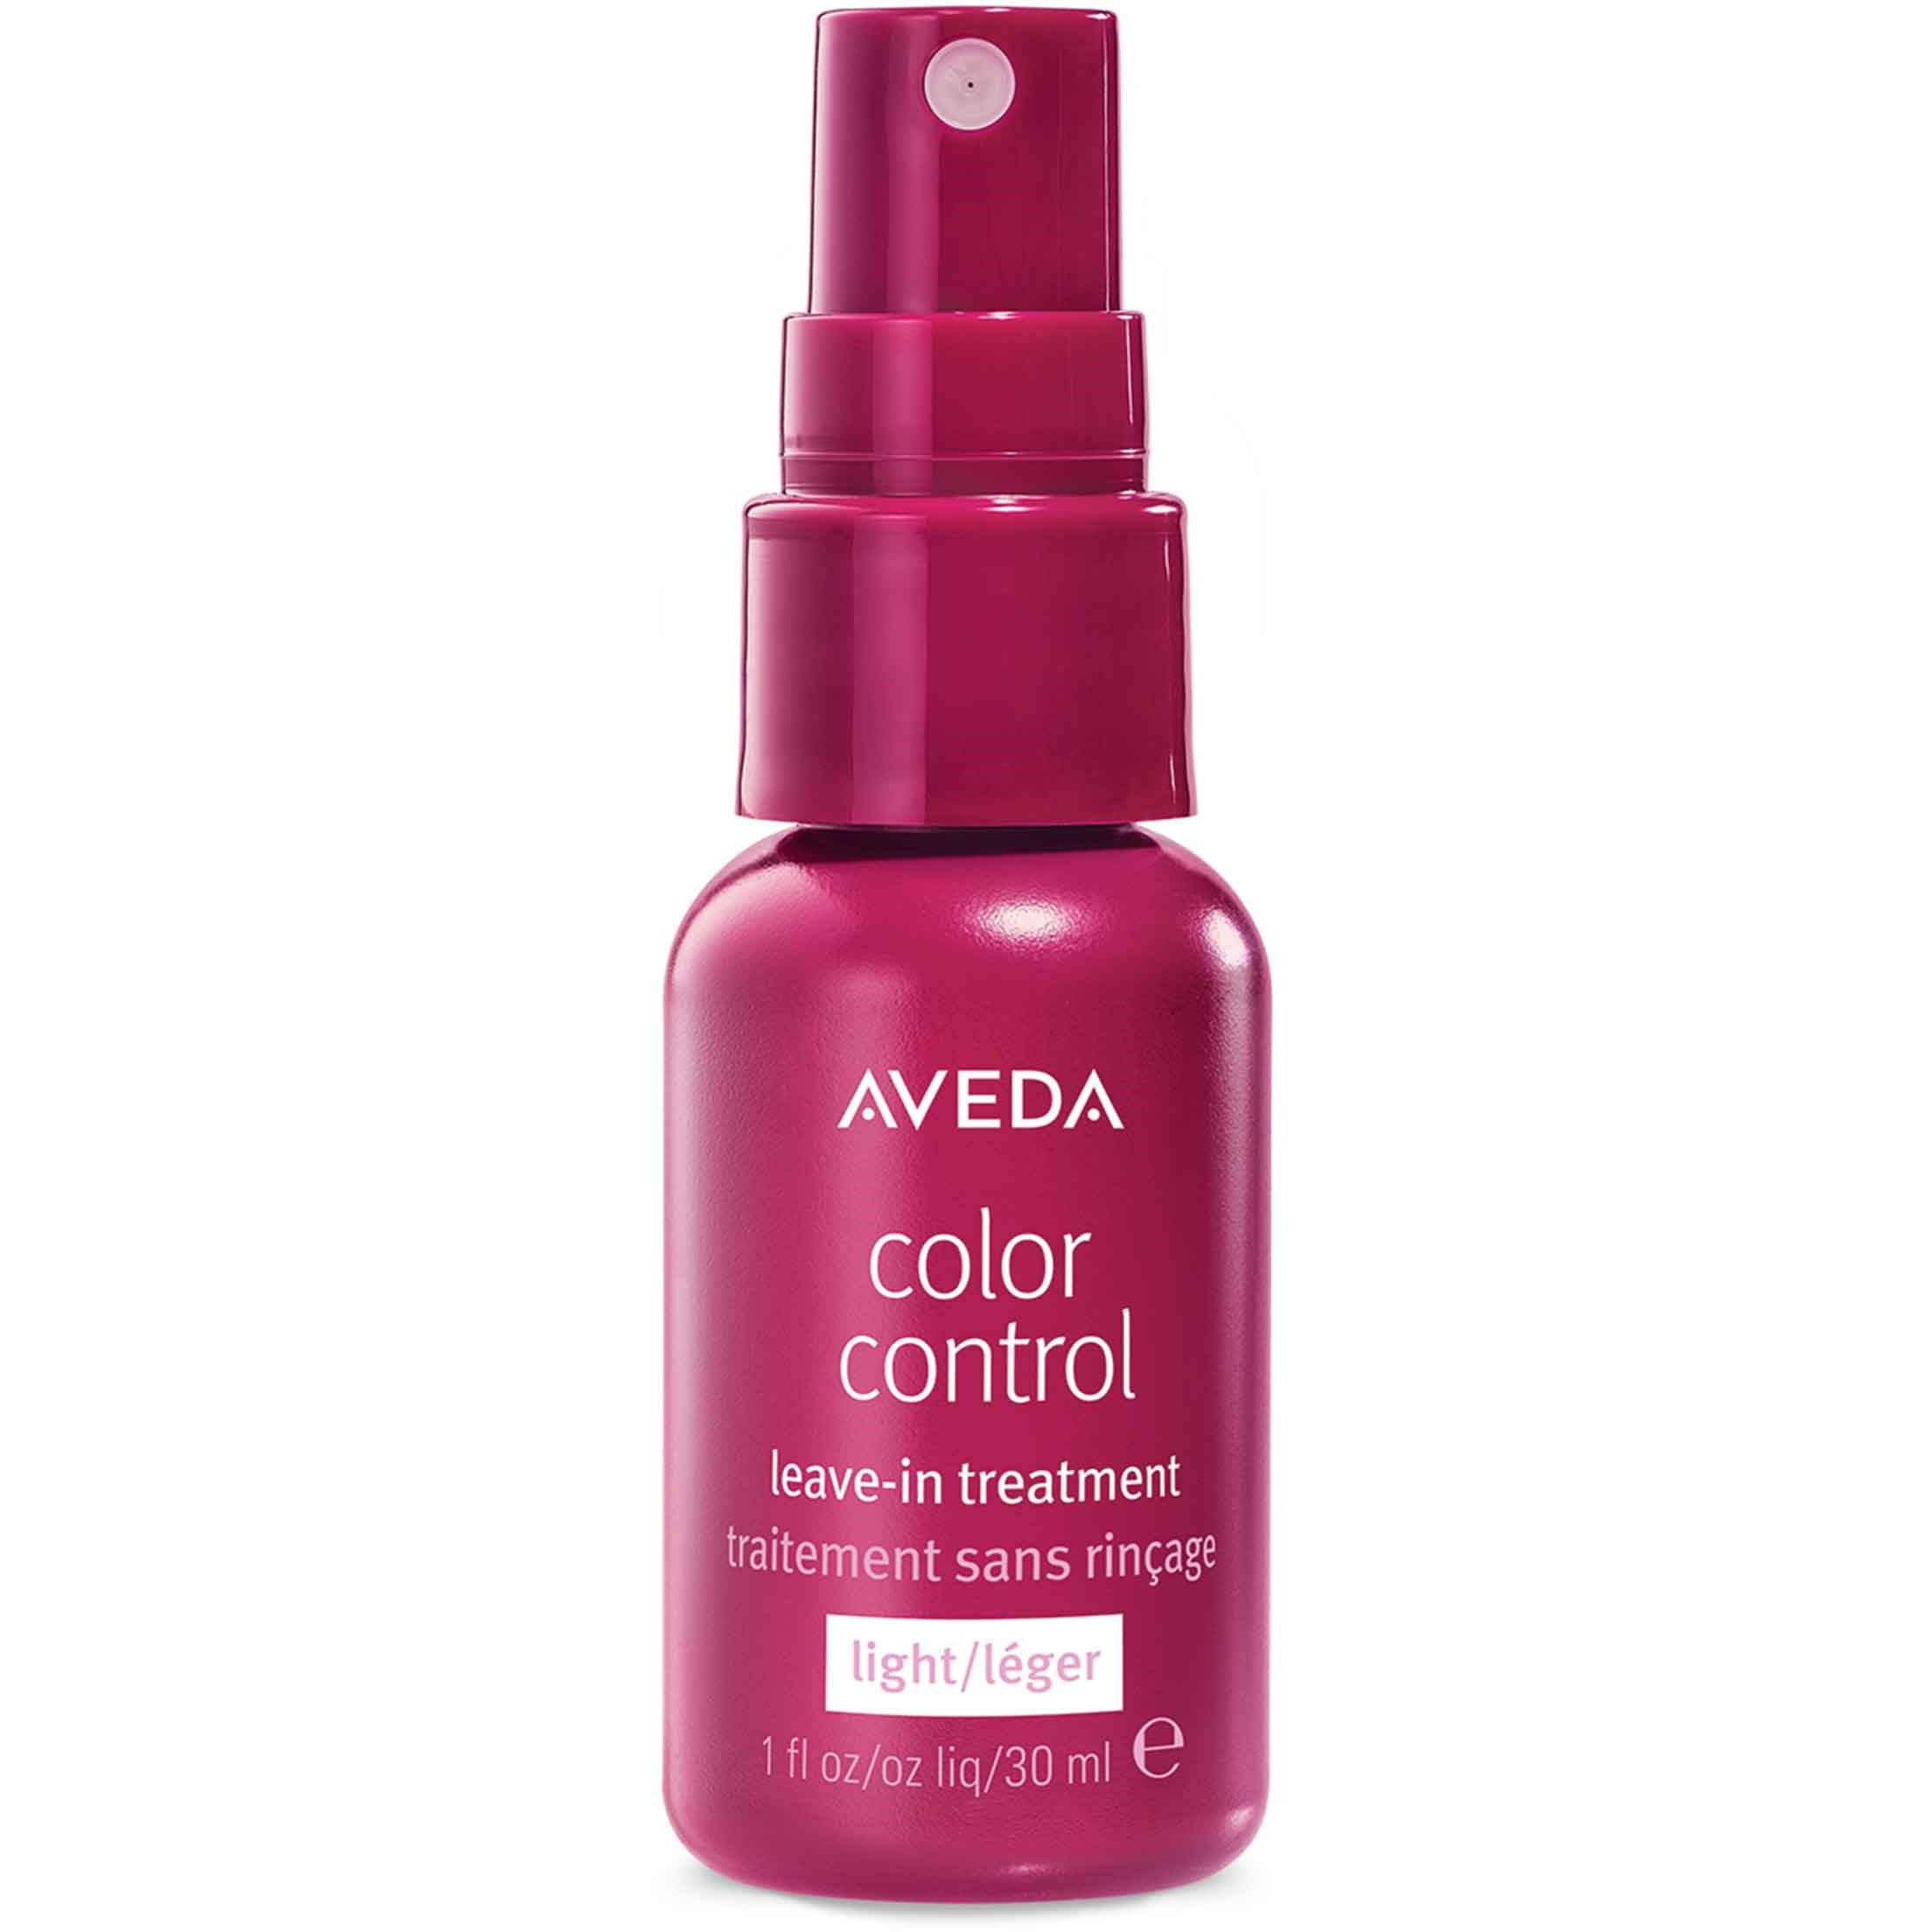 AVEDA Color control Leave-In Spray Light Treatment Travel Size 30 ml